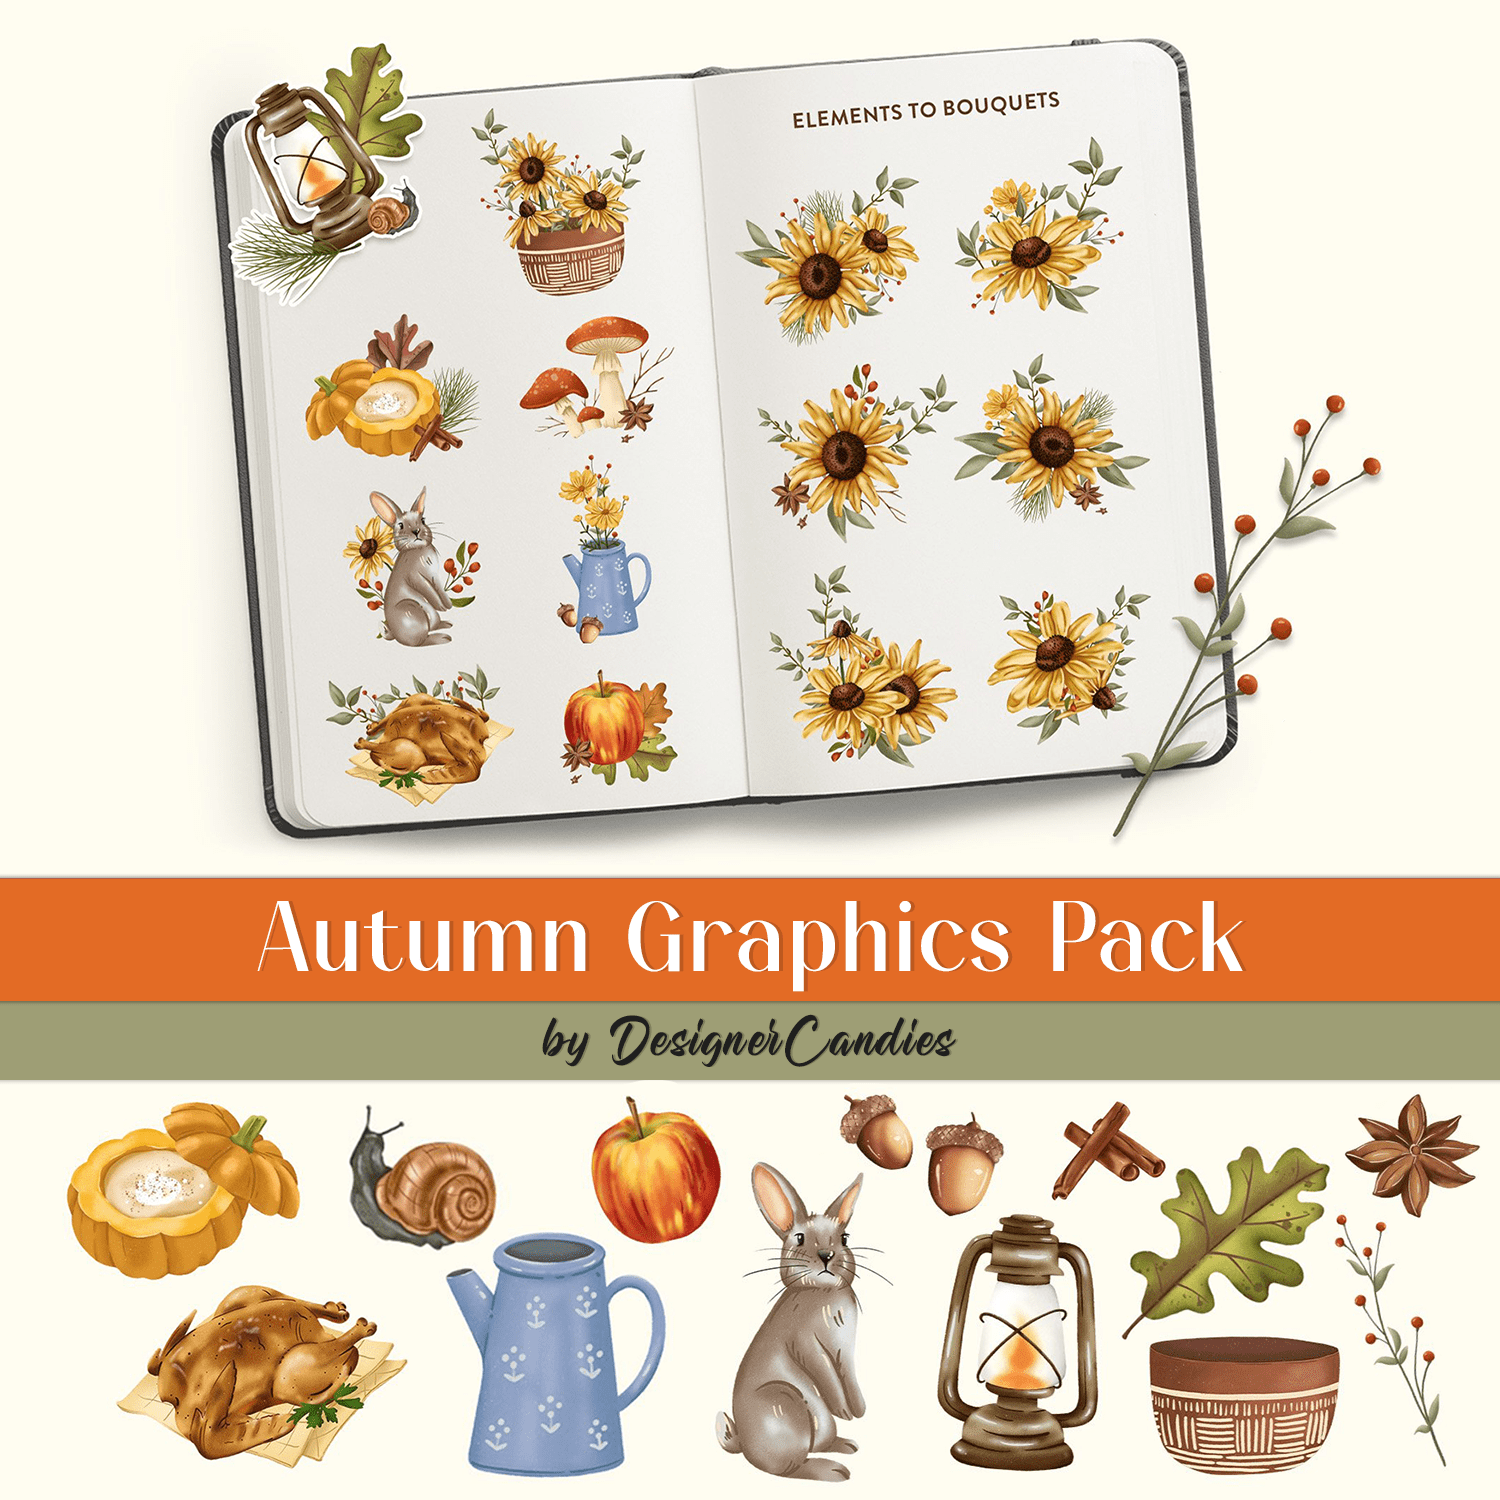 Autumn Graphics Pack cover.